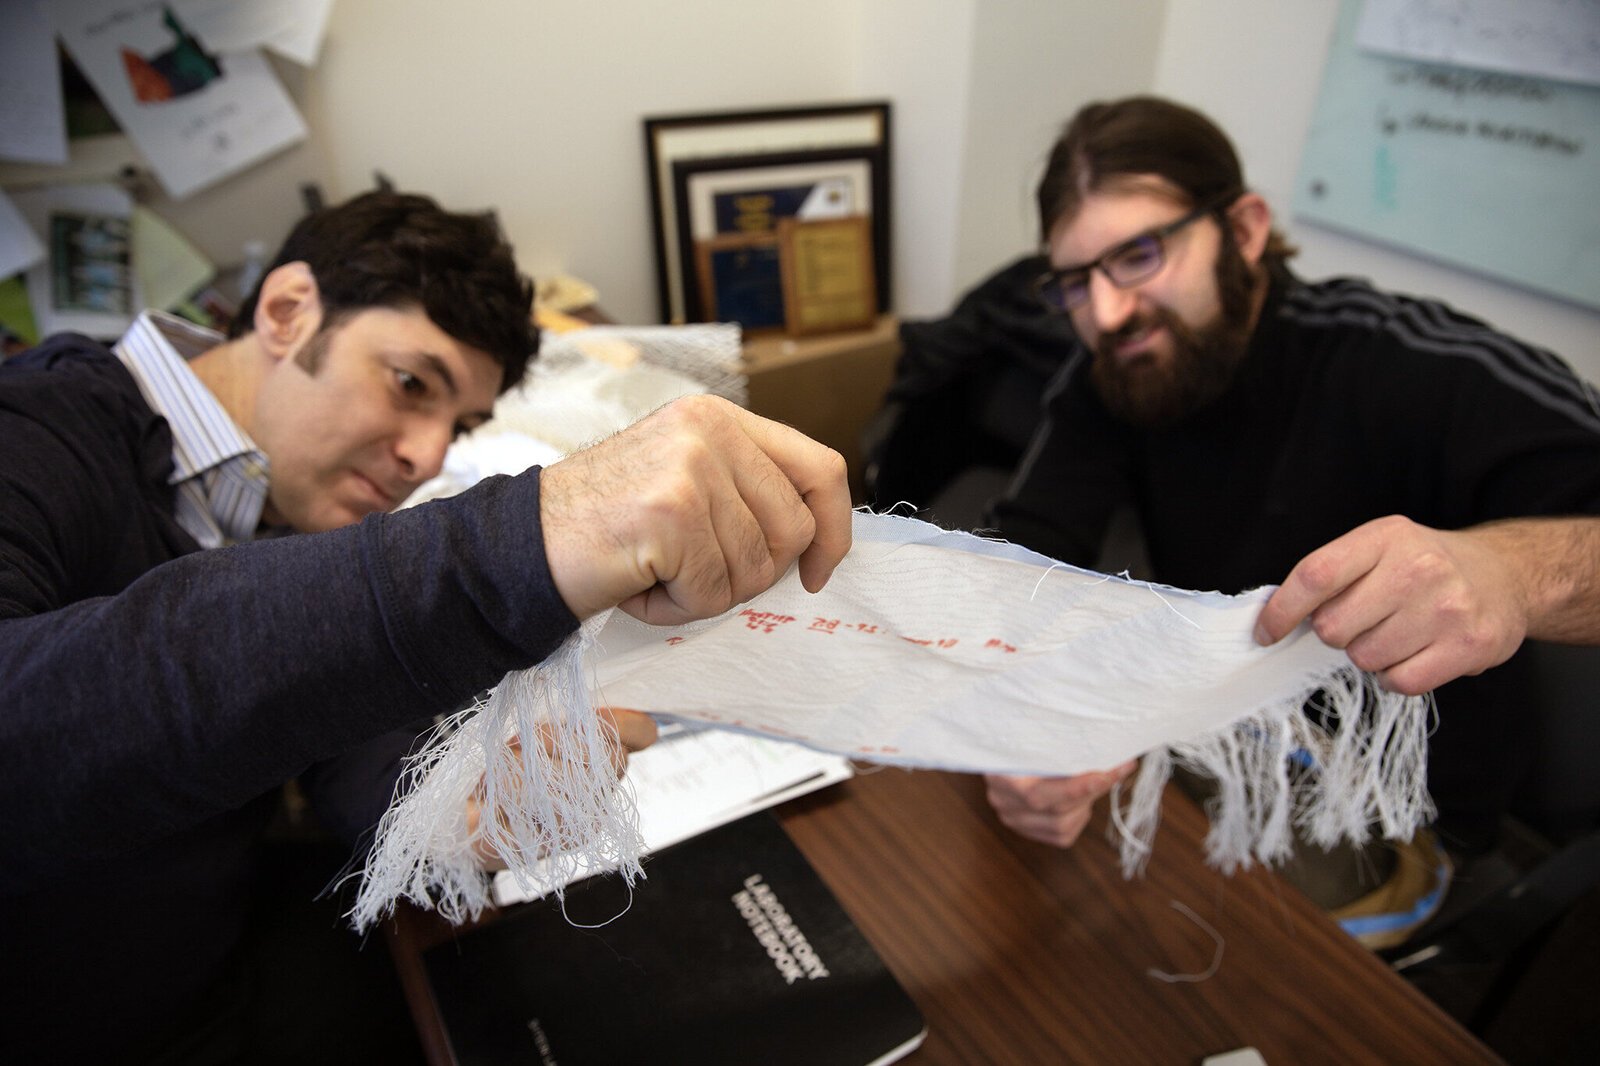 U-M Professor of Materials Science and Engineering Max Stein and Brian Iezzi, post-doctoral researcher at U-M's Materials Science and Engineering Department, analyze fabric with photonic fibers woven into it.